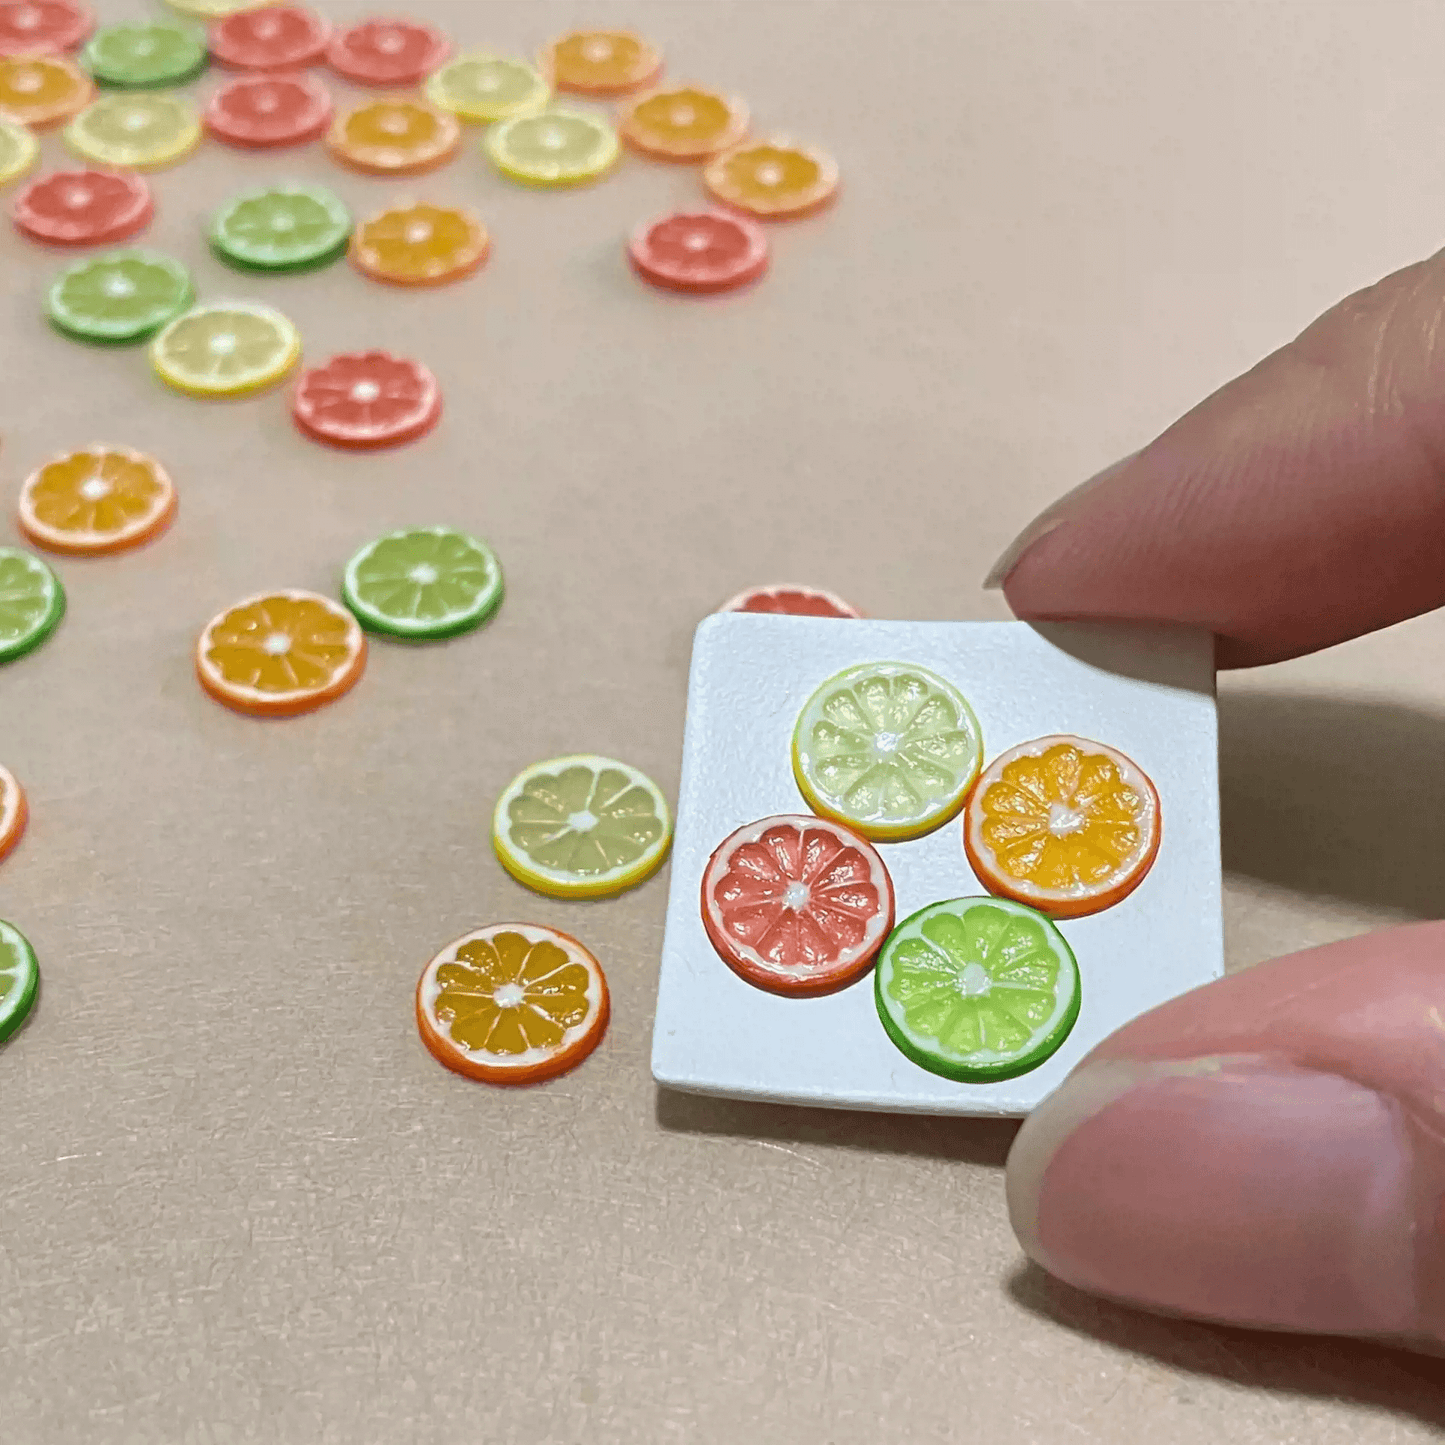 This miniature fruit Slice of Lemon / Lime / Grapefruit / Orange would be a wonderful addition to any doll's house kitchen or dining room table. Miniature fruits for dollhouse. Miniature Slice of Lemon / Lime / Grapefruit / Orange handmade from clay.